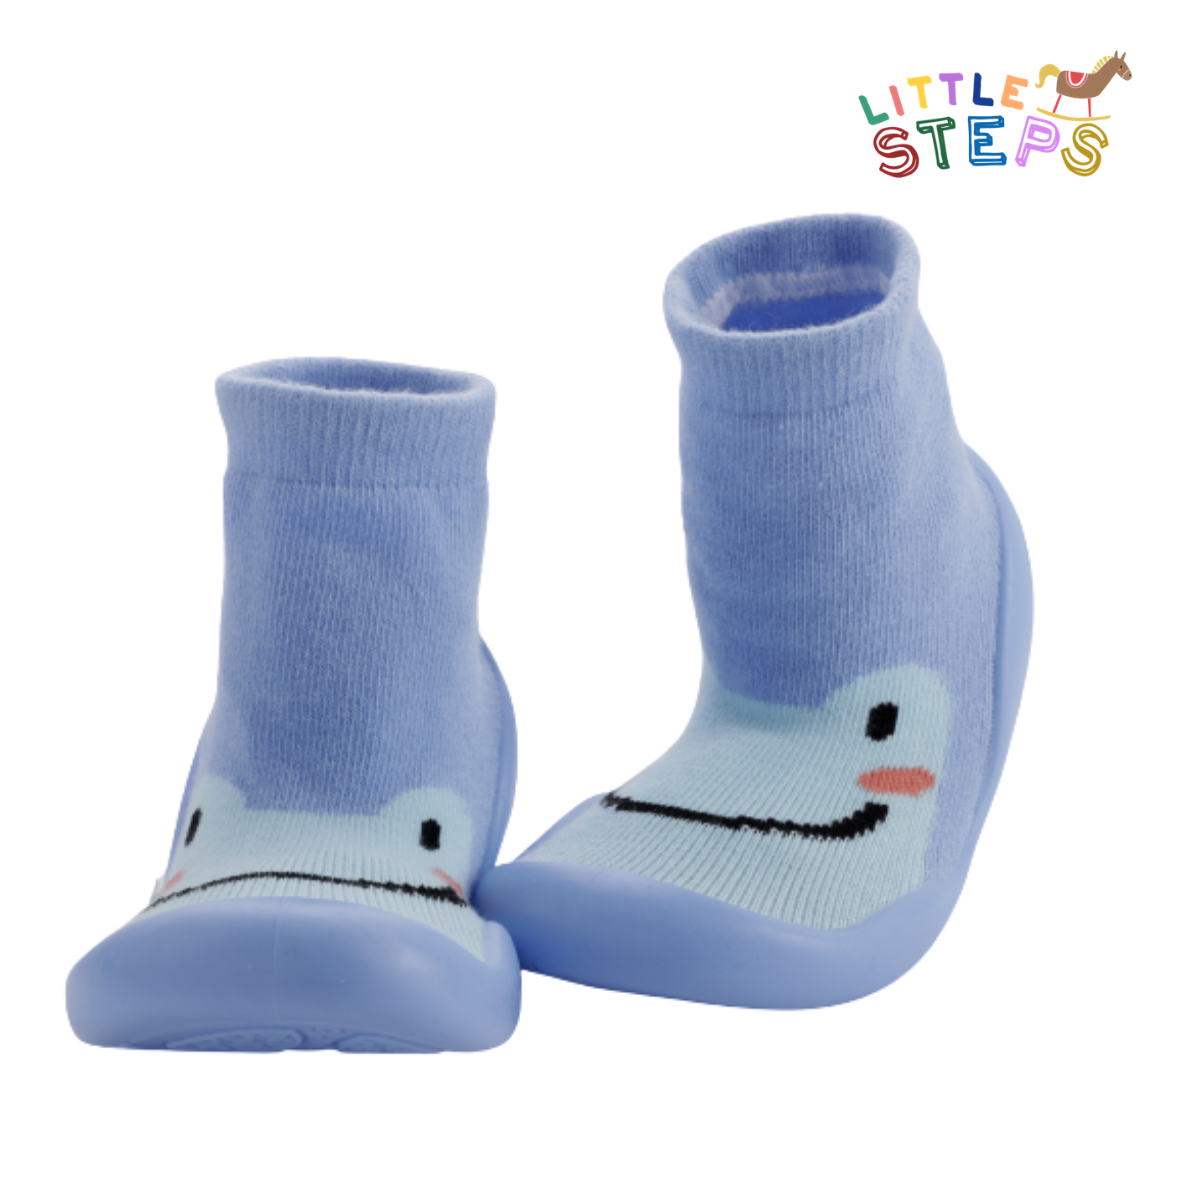 Little Steps Baby and Kids shoes socks 